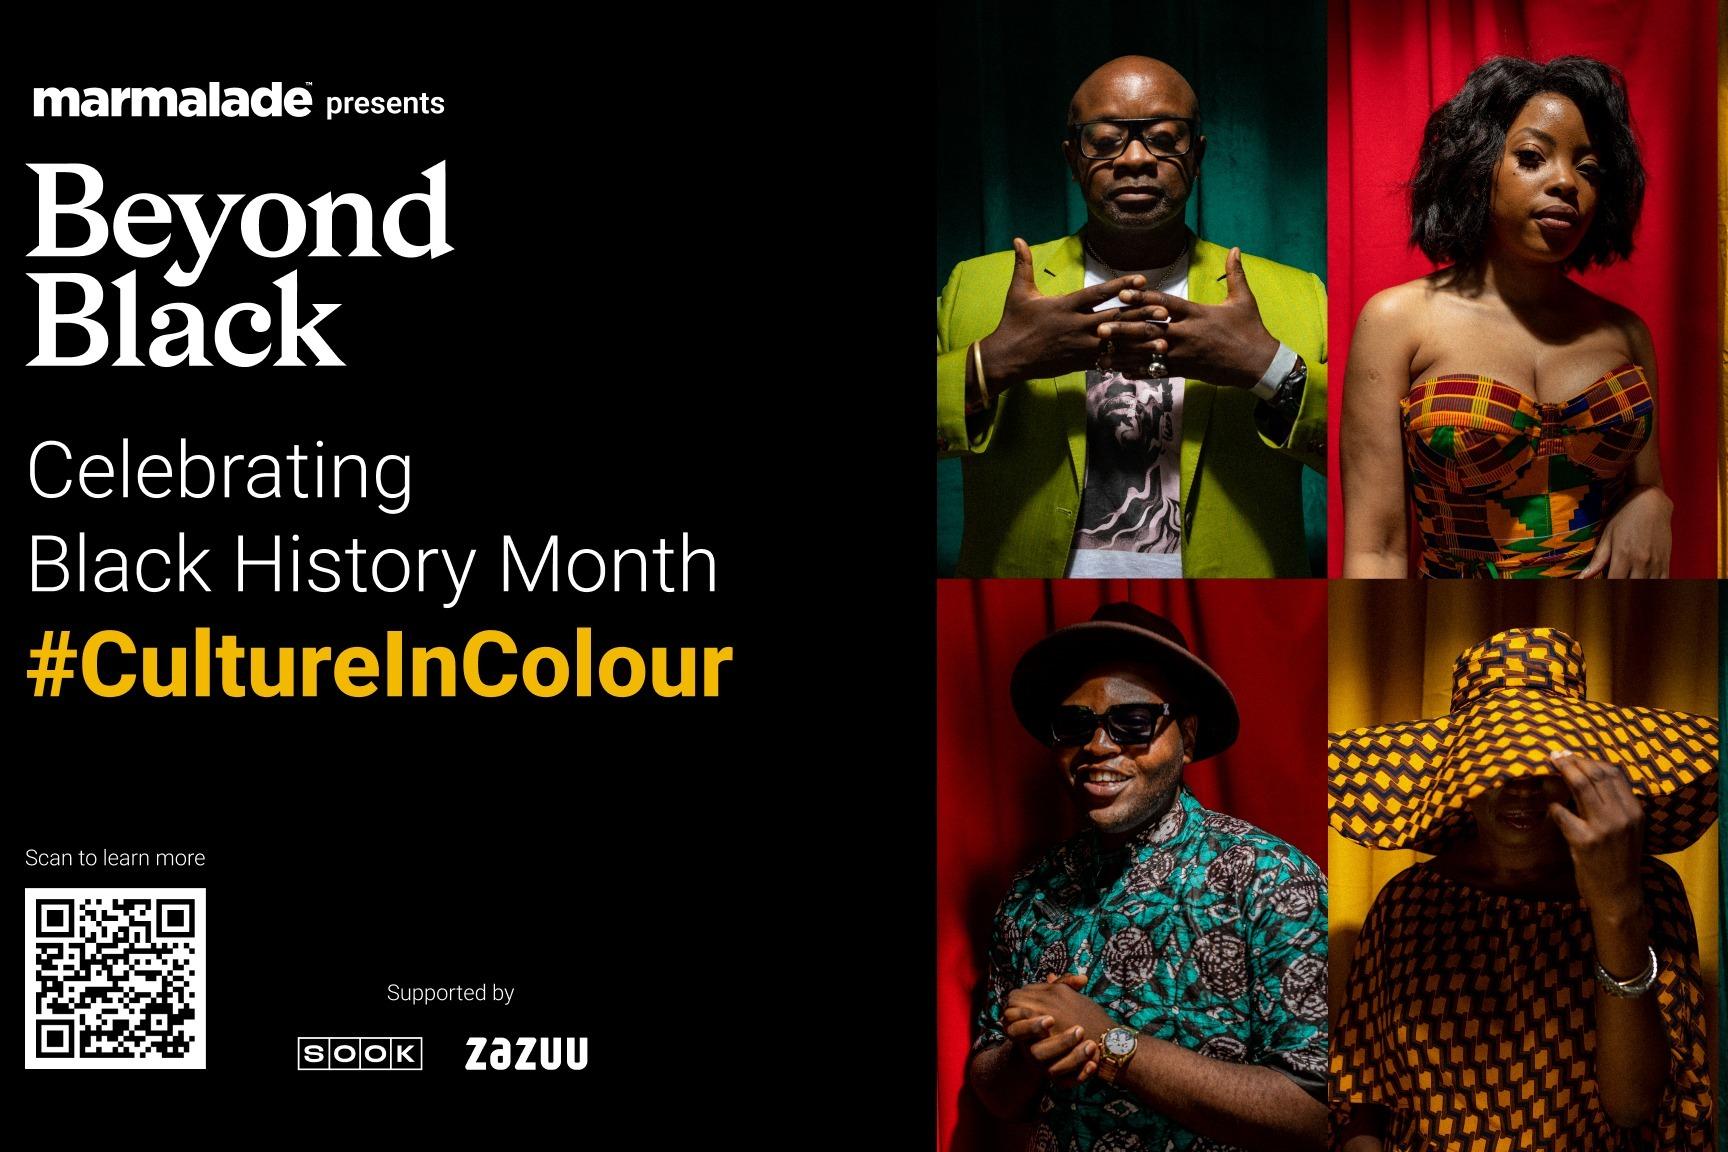 graphic of Beyond Black culture in colour celebrating black history month